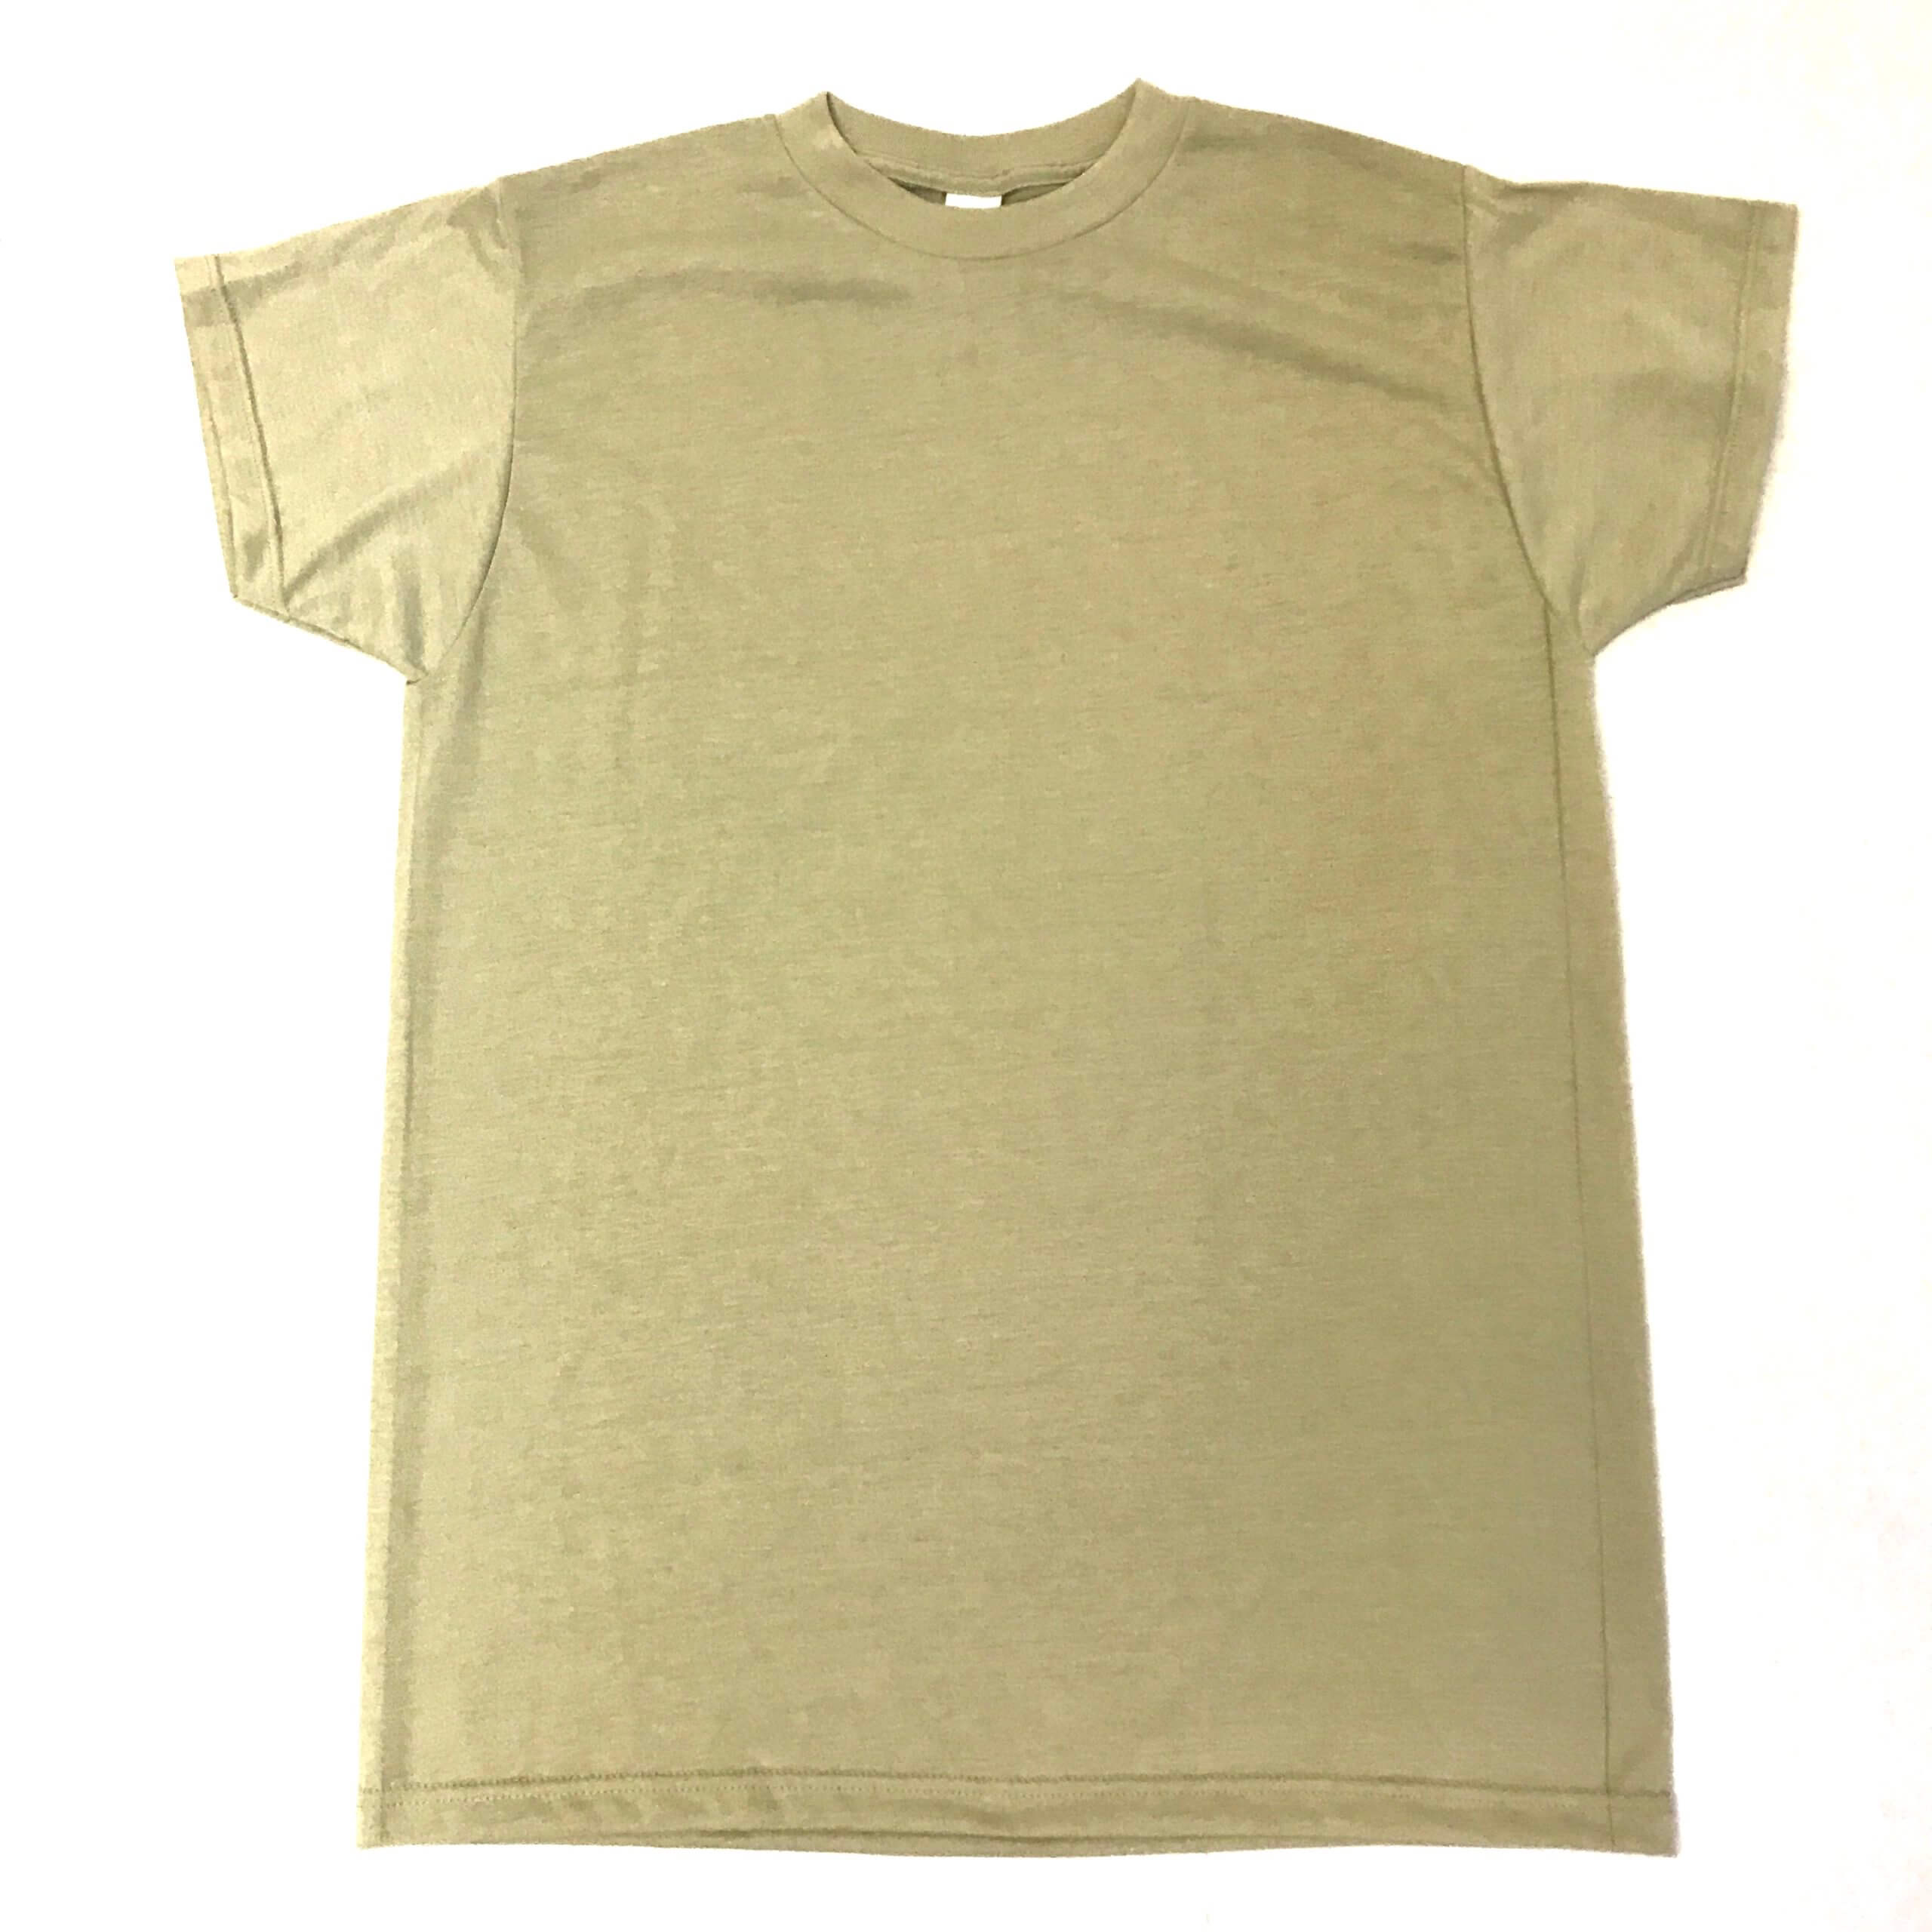 3 Pack Tee Shirts Sand-Large 